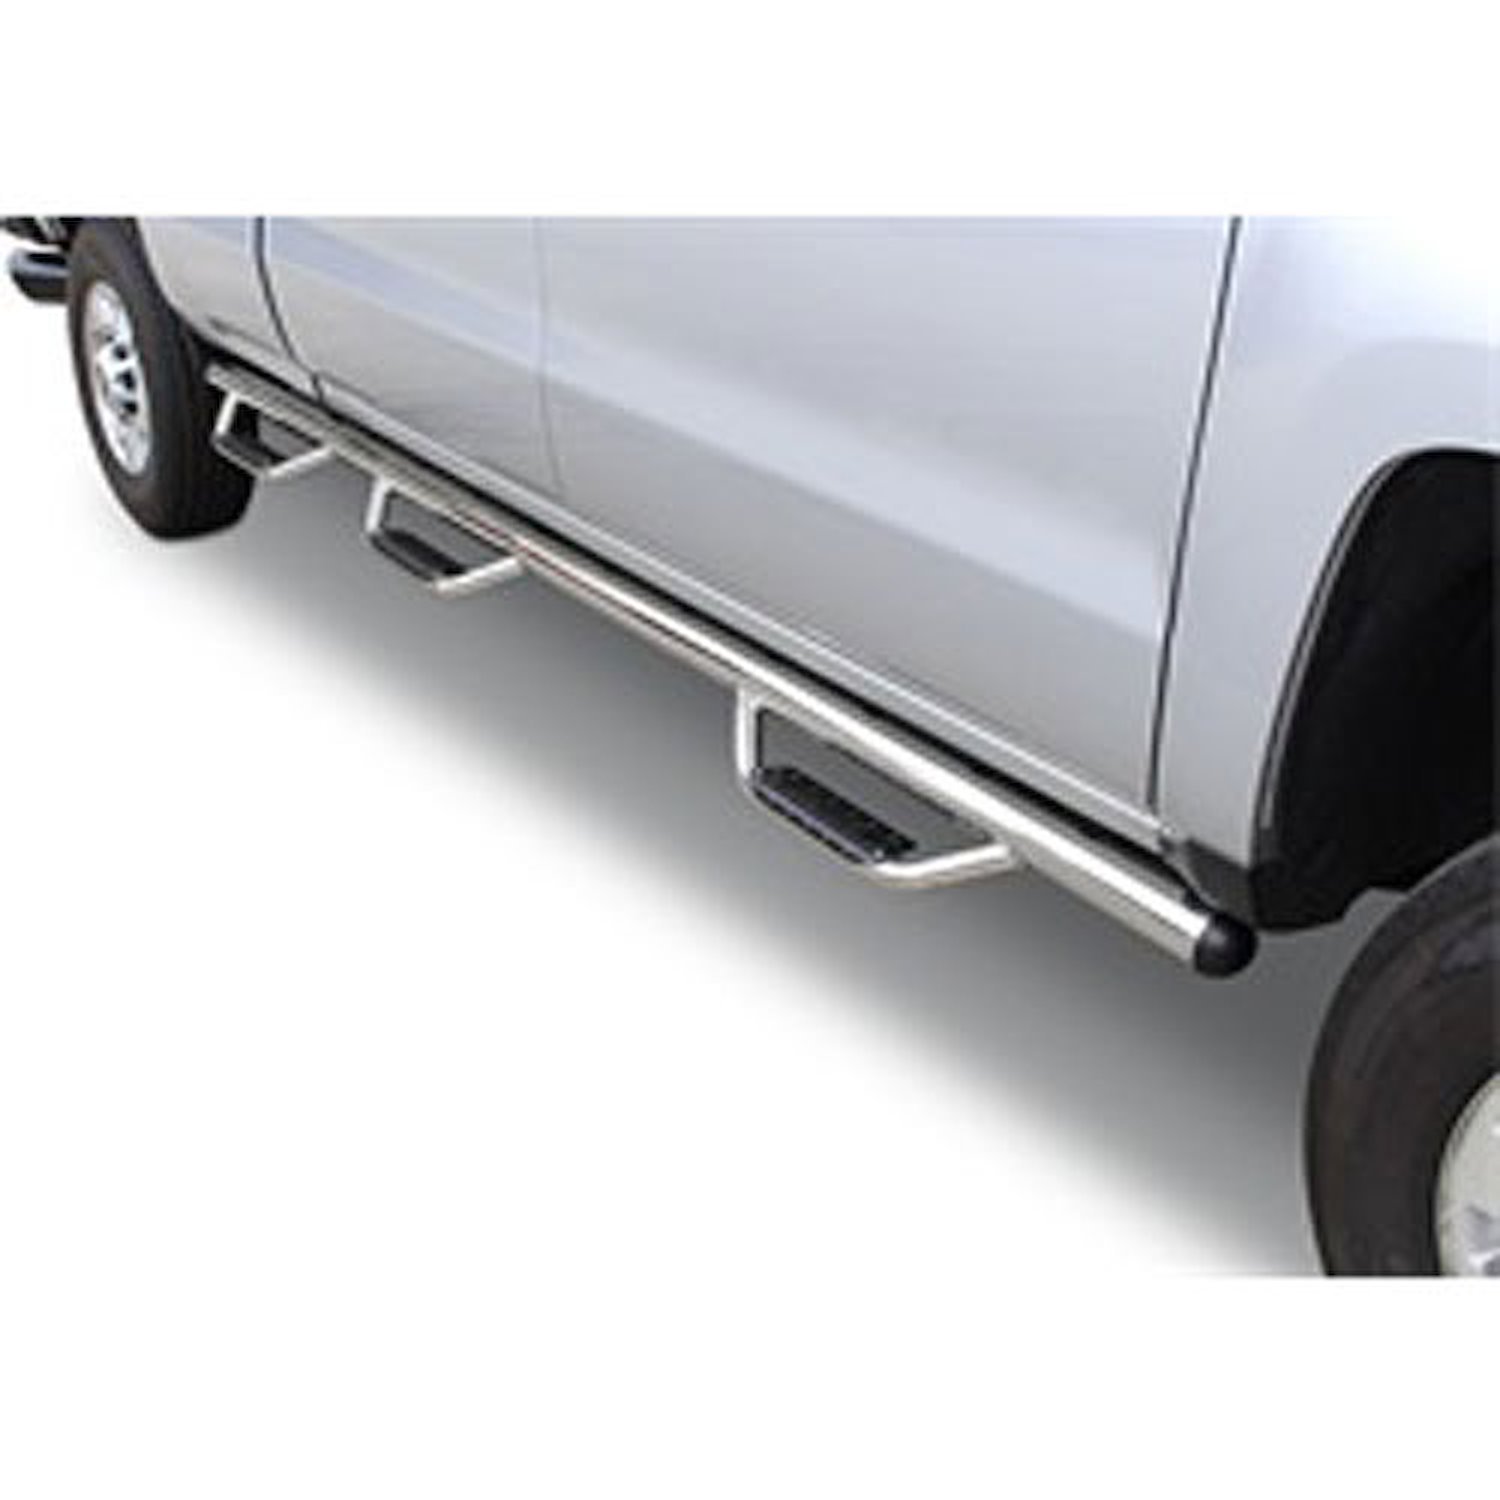 Dominator D3 One Piece SideSteps 2015-16 Ford F-150